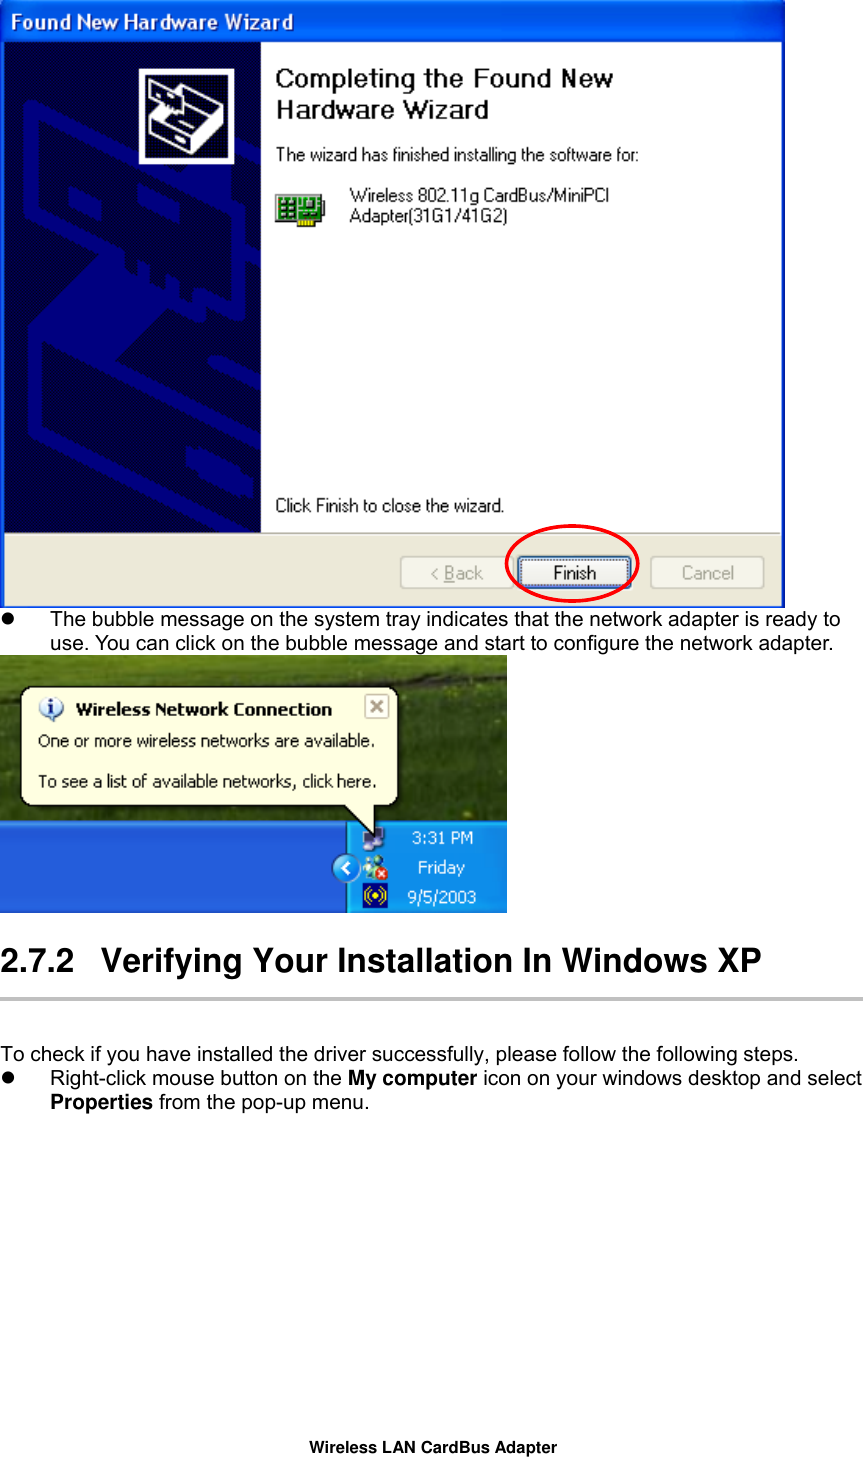    The bubble message on the system tray indicates that the network adapter is ready to use. You can click on the bubble message and start to configure the network adapter.   2.7.2  Verifying Your Installation In Windows XP   To check if you have installed the driver successfully, please follow the following steps.   Right-click mouse button on the My computer icon on your windows desktop and select Properties from the pop-up menu. Wireless LAN CardBus Adapter 